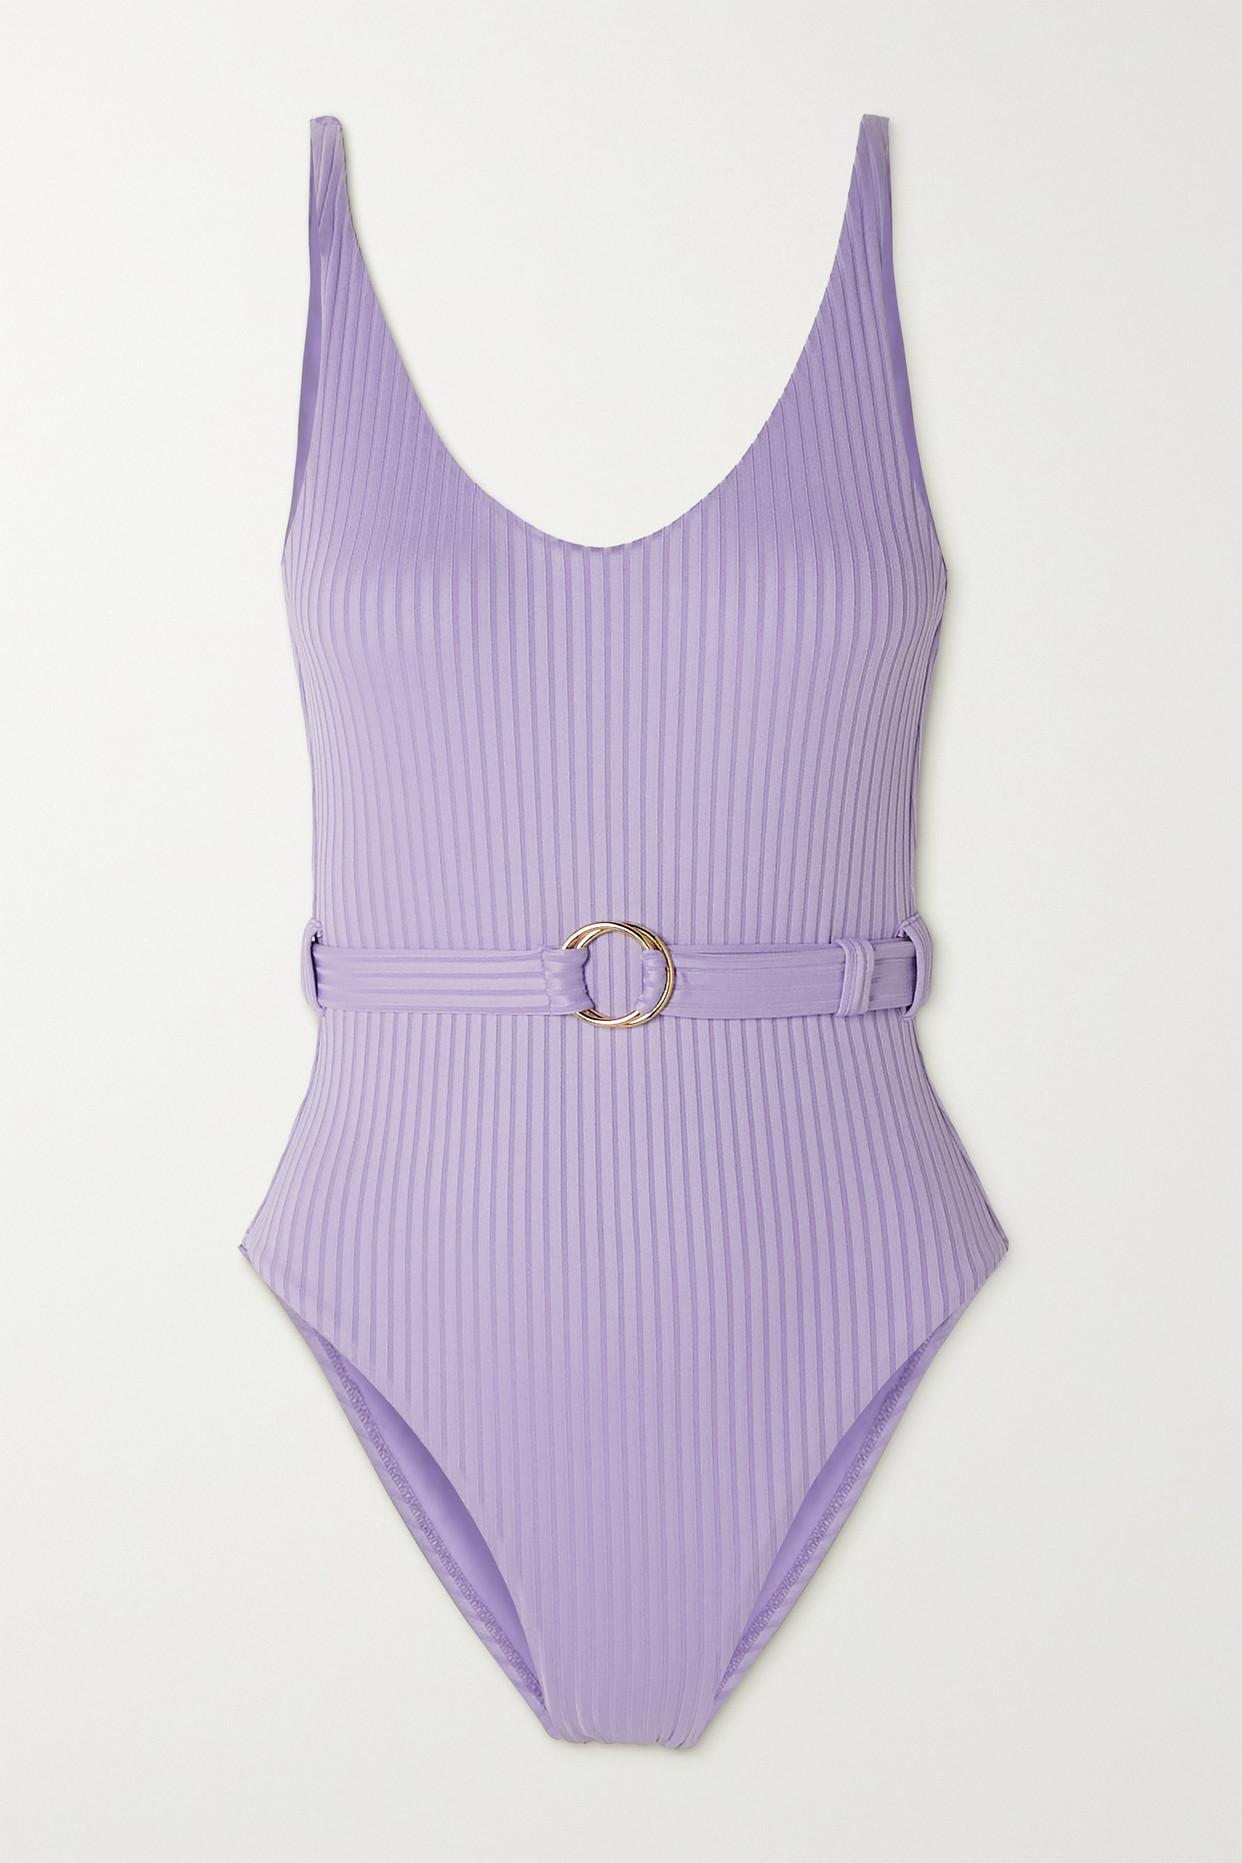 Melissa Odabash St Tropez Belted Ribbed Swimsuit in Purple | Lyst Canada